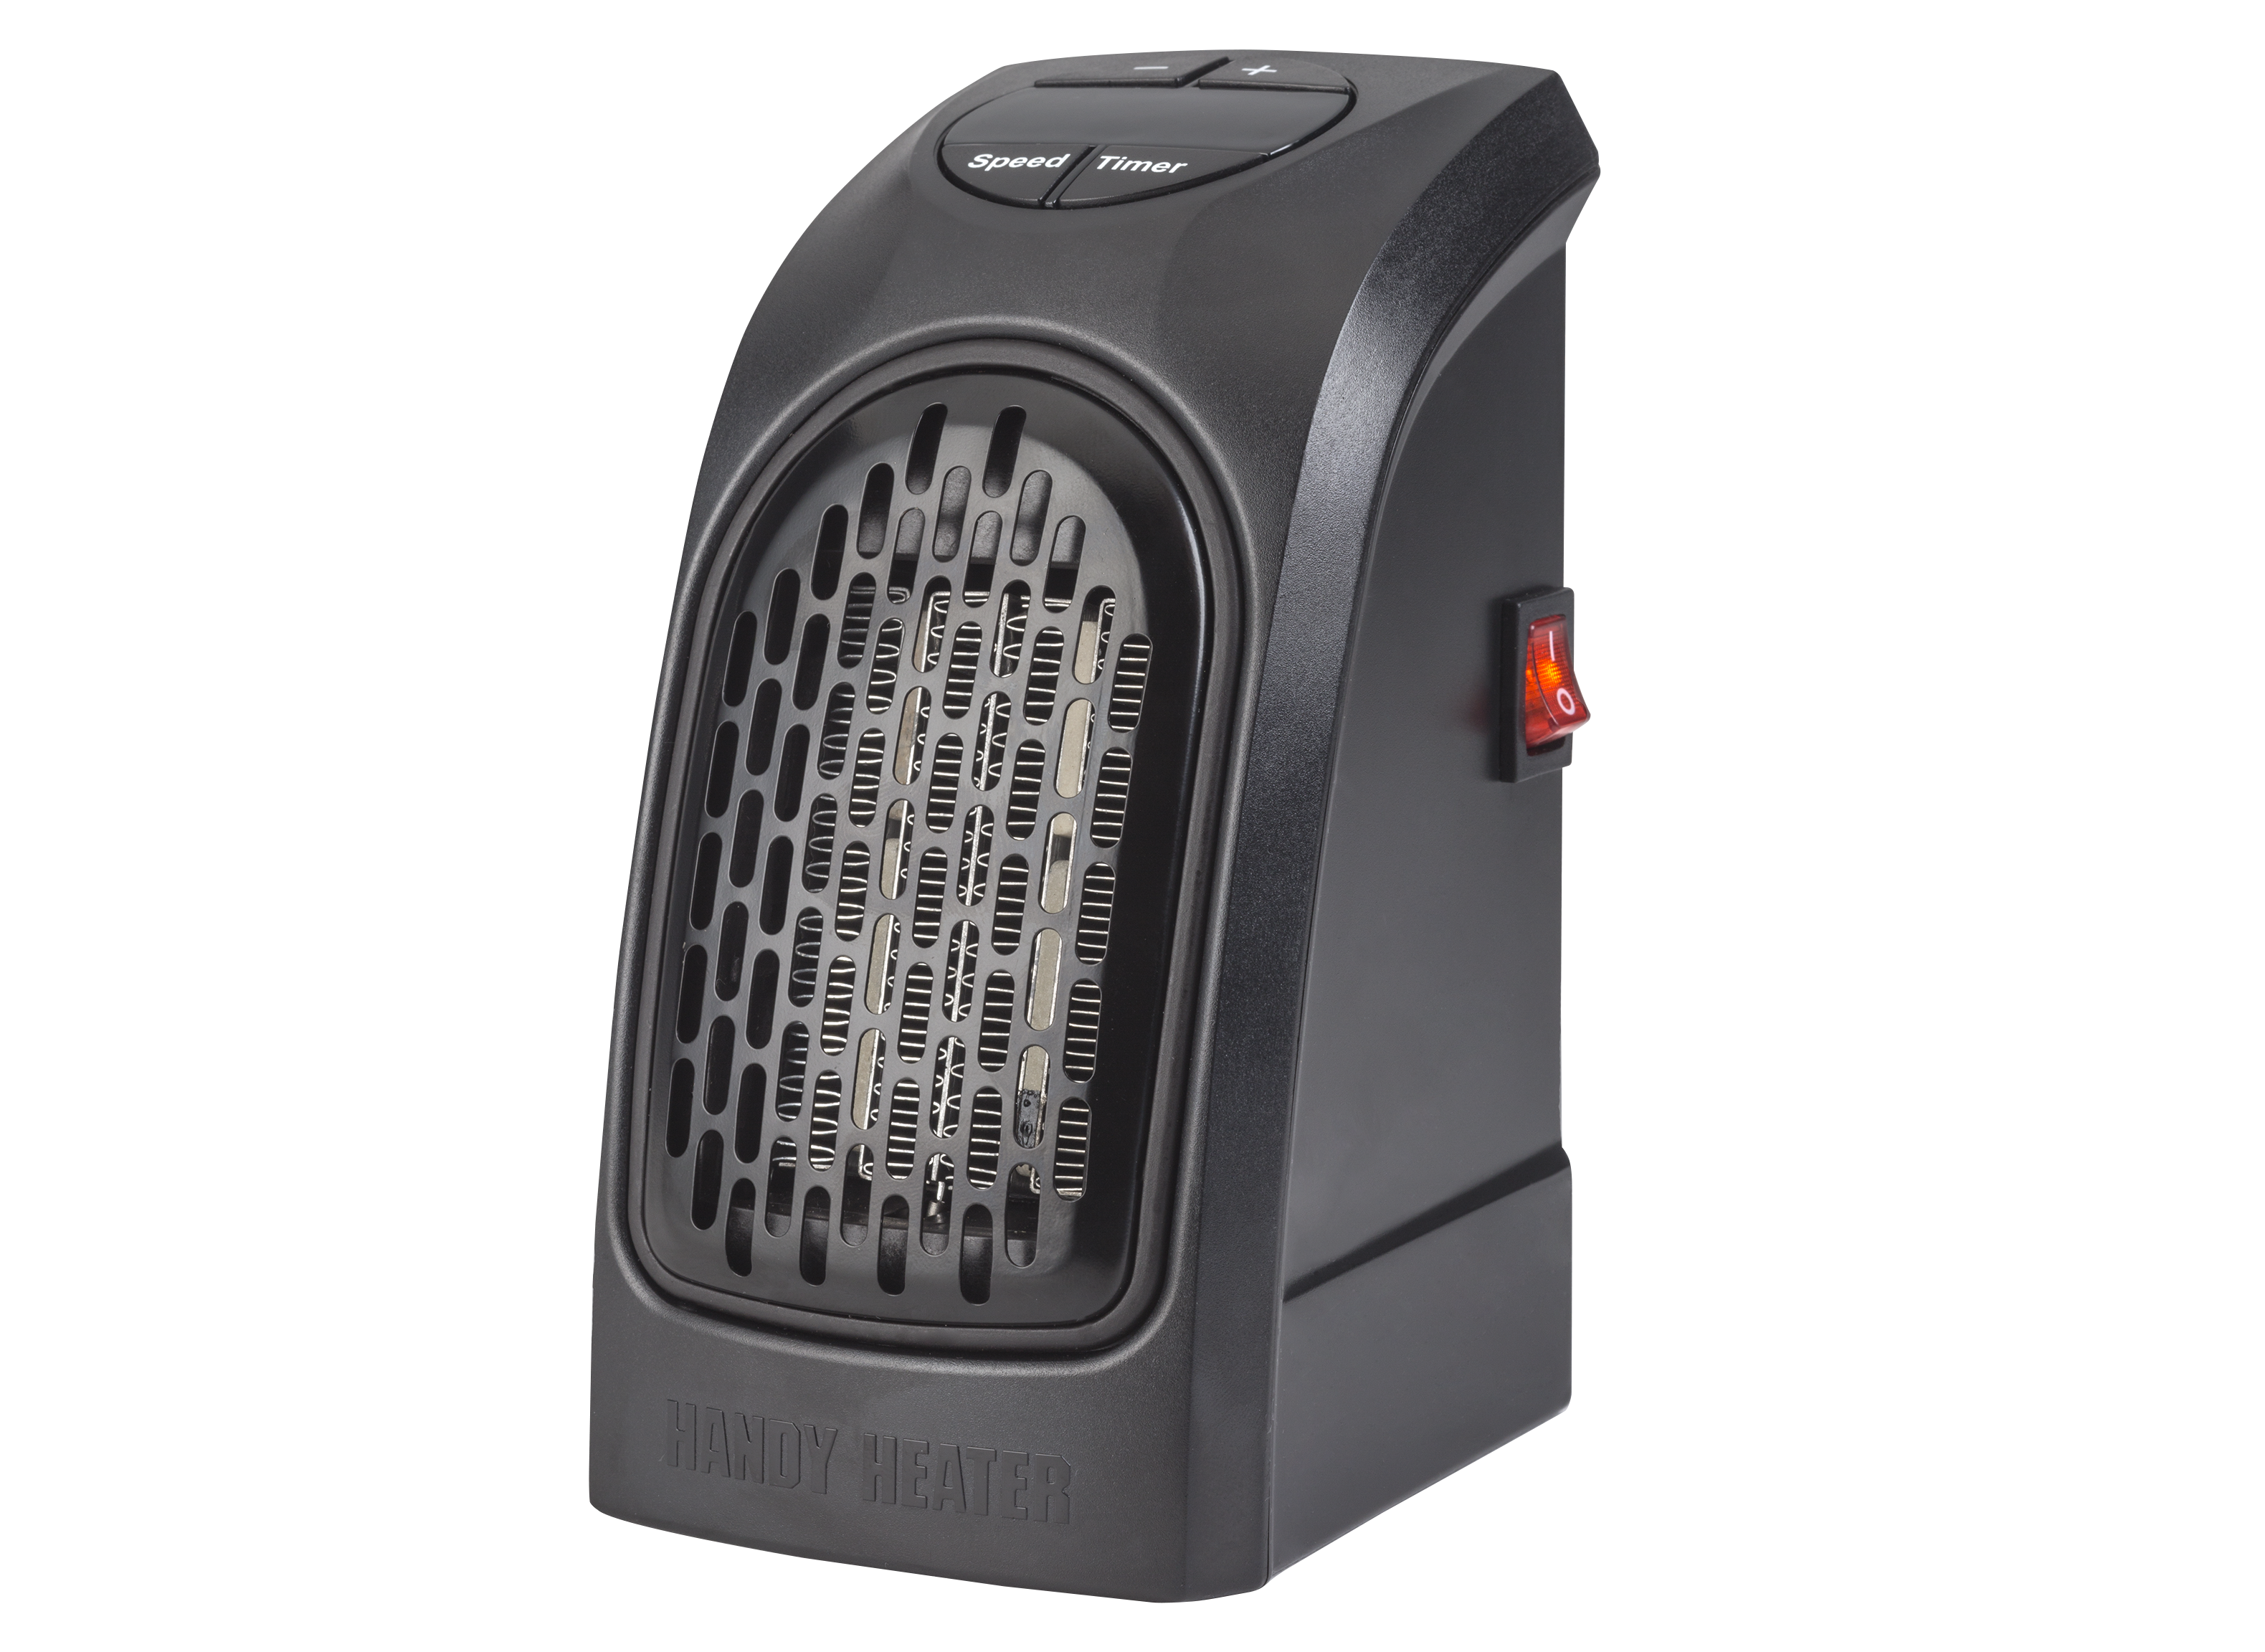 https://crdms.images.consumerreports.org/prod/products/cr/models/388276-spaceheaters-handyheater-thepluginpersonalheater.png